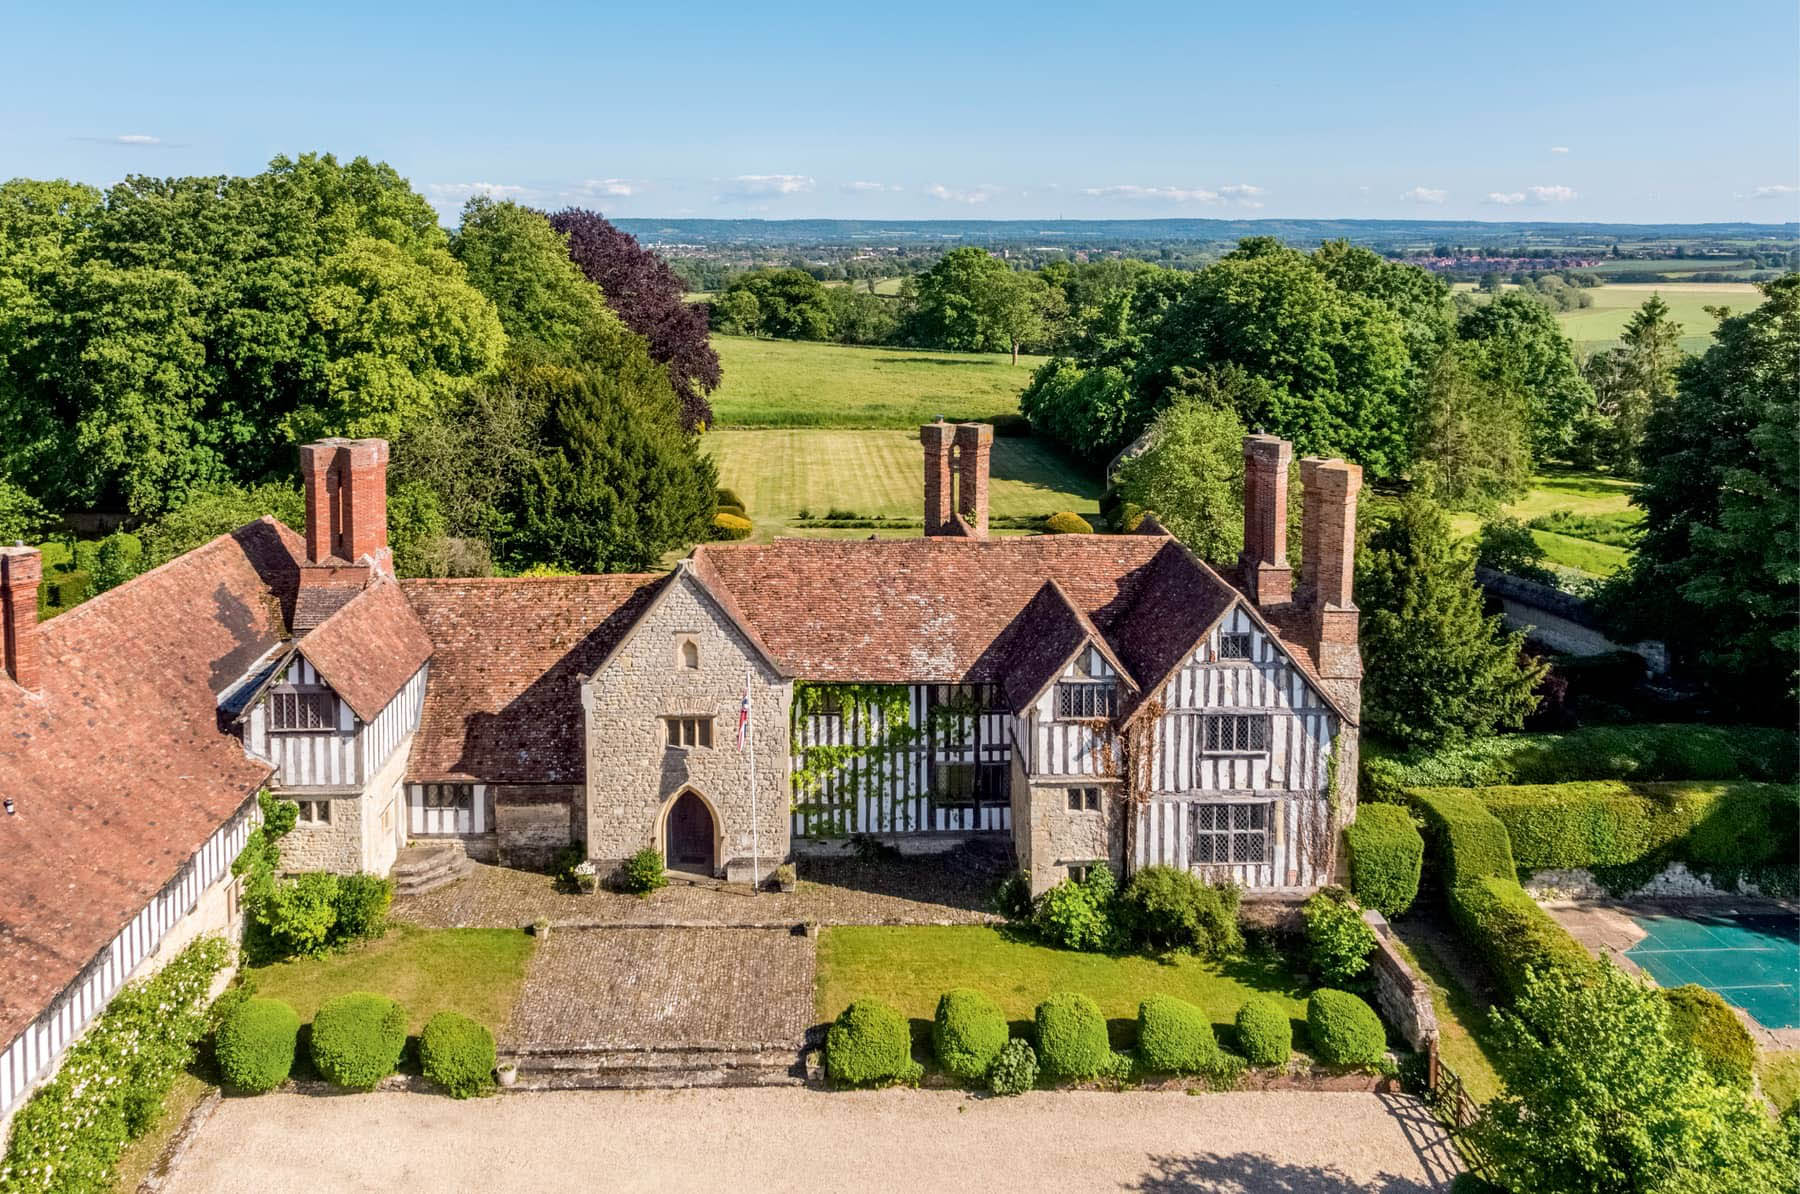 A Spectacular Medieval House For Sale That Could Pay For Itself